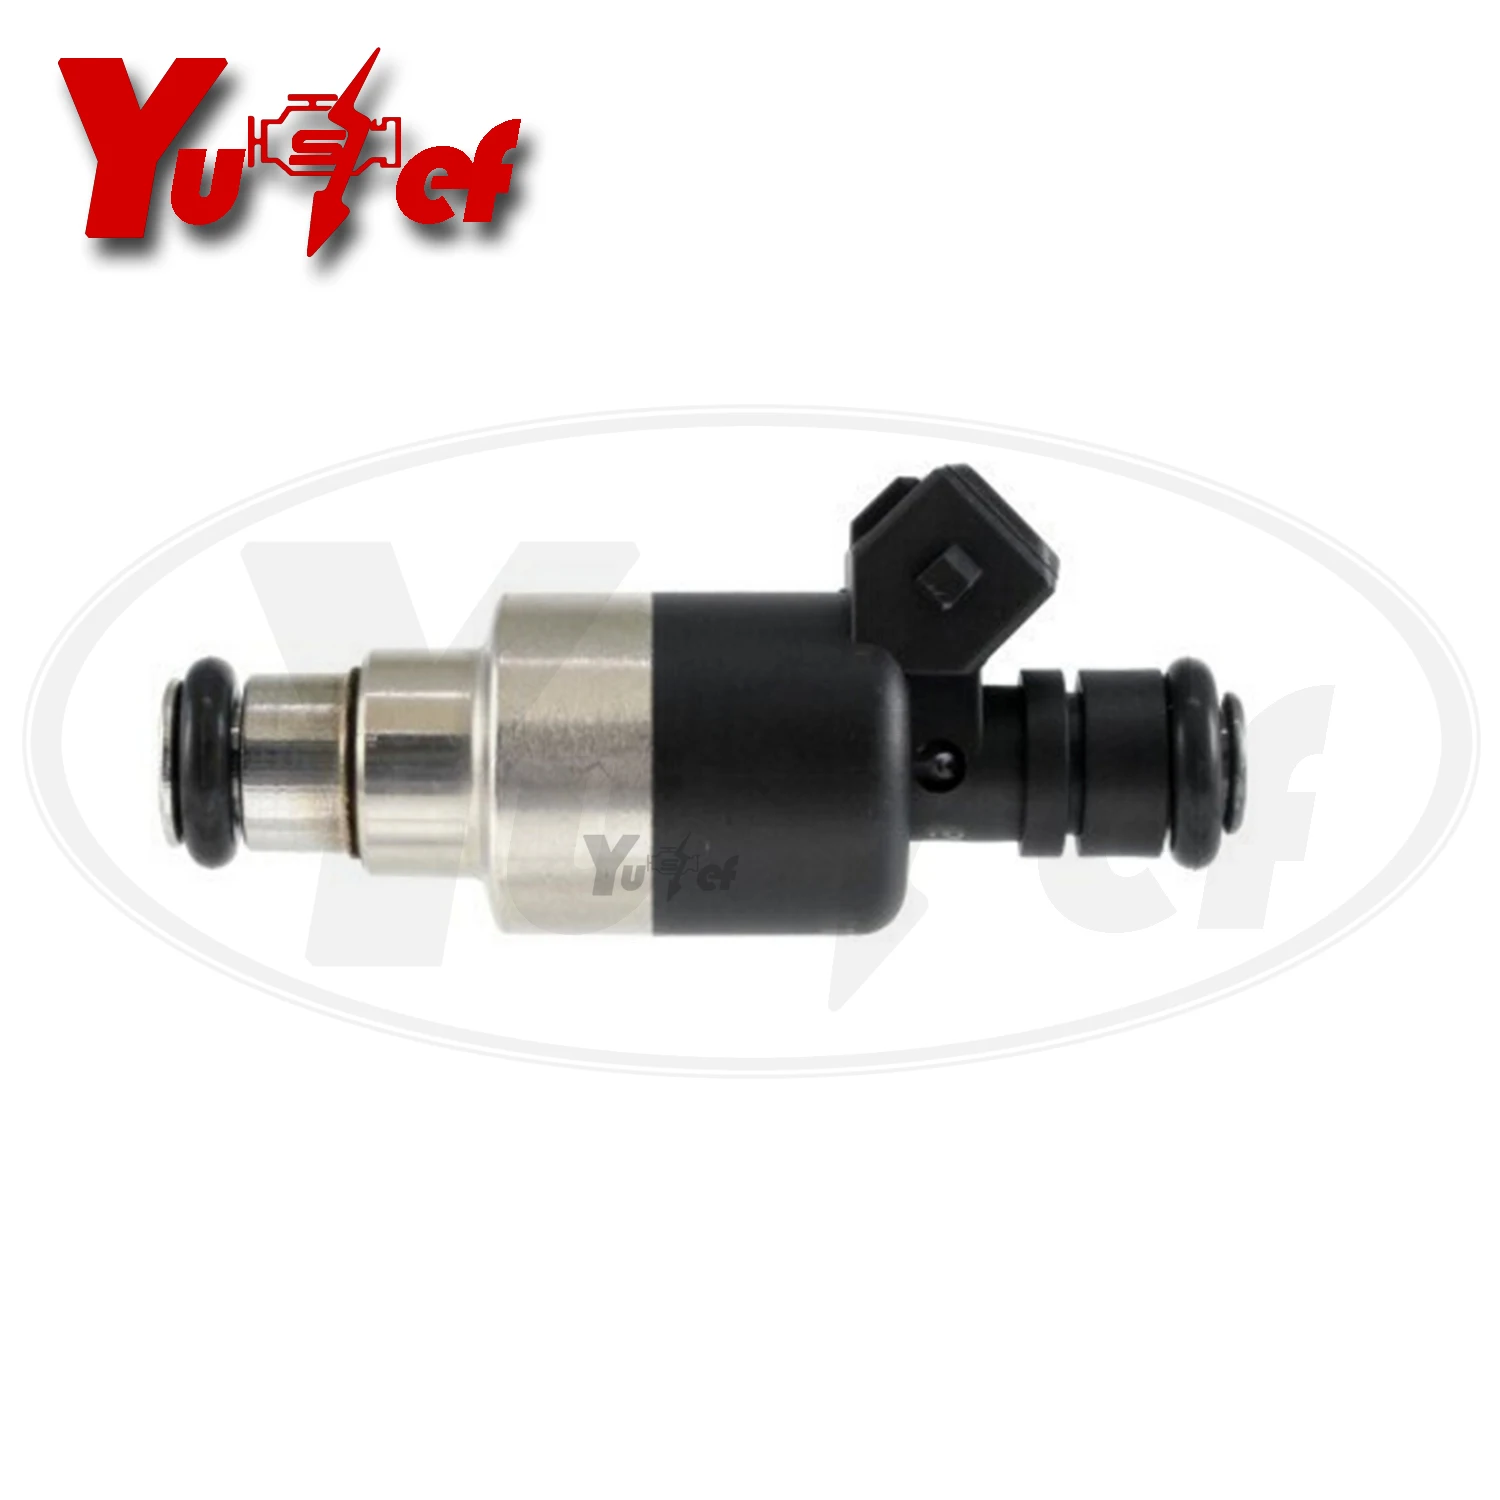 

high quality fuel injector nozzle fit for CAMARO 6CYL 3.8L 1995-1999 17103146 17069648 17083476 17105050